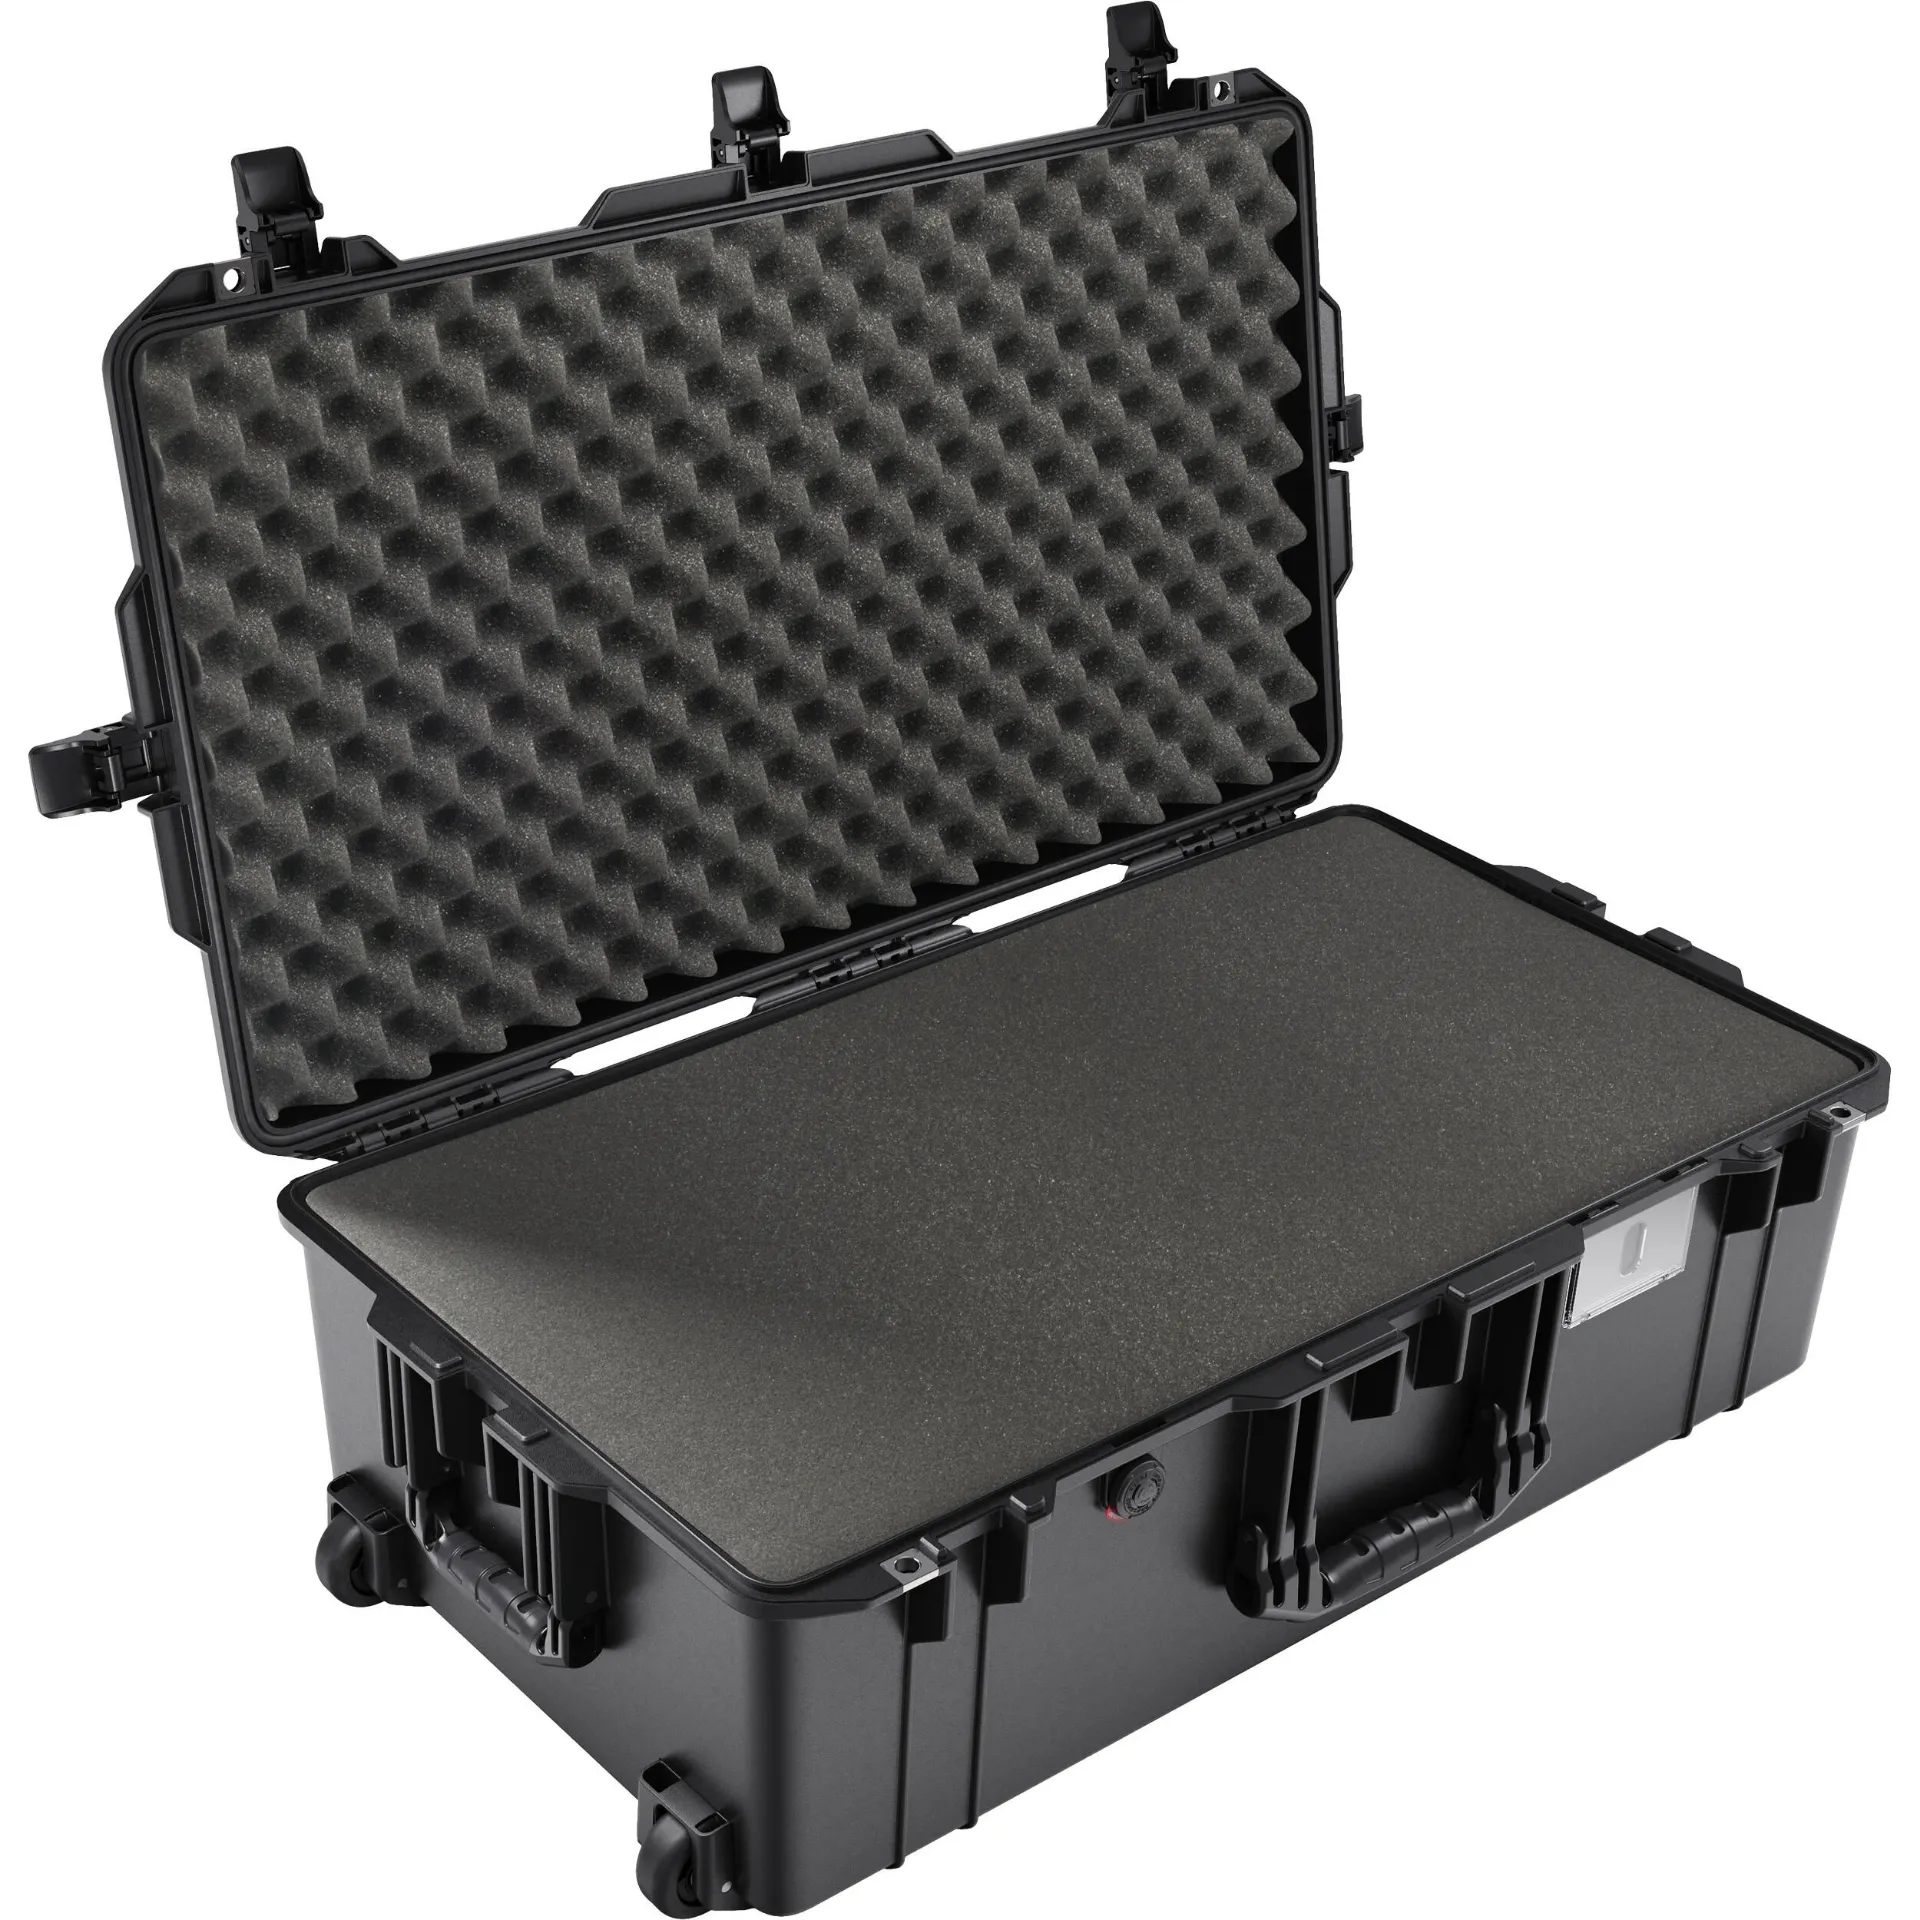 Picture of Pelican 1615 Air Gen 2 Wheeled Hard Case (Black, With Foam)